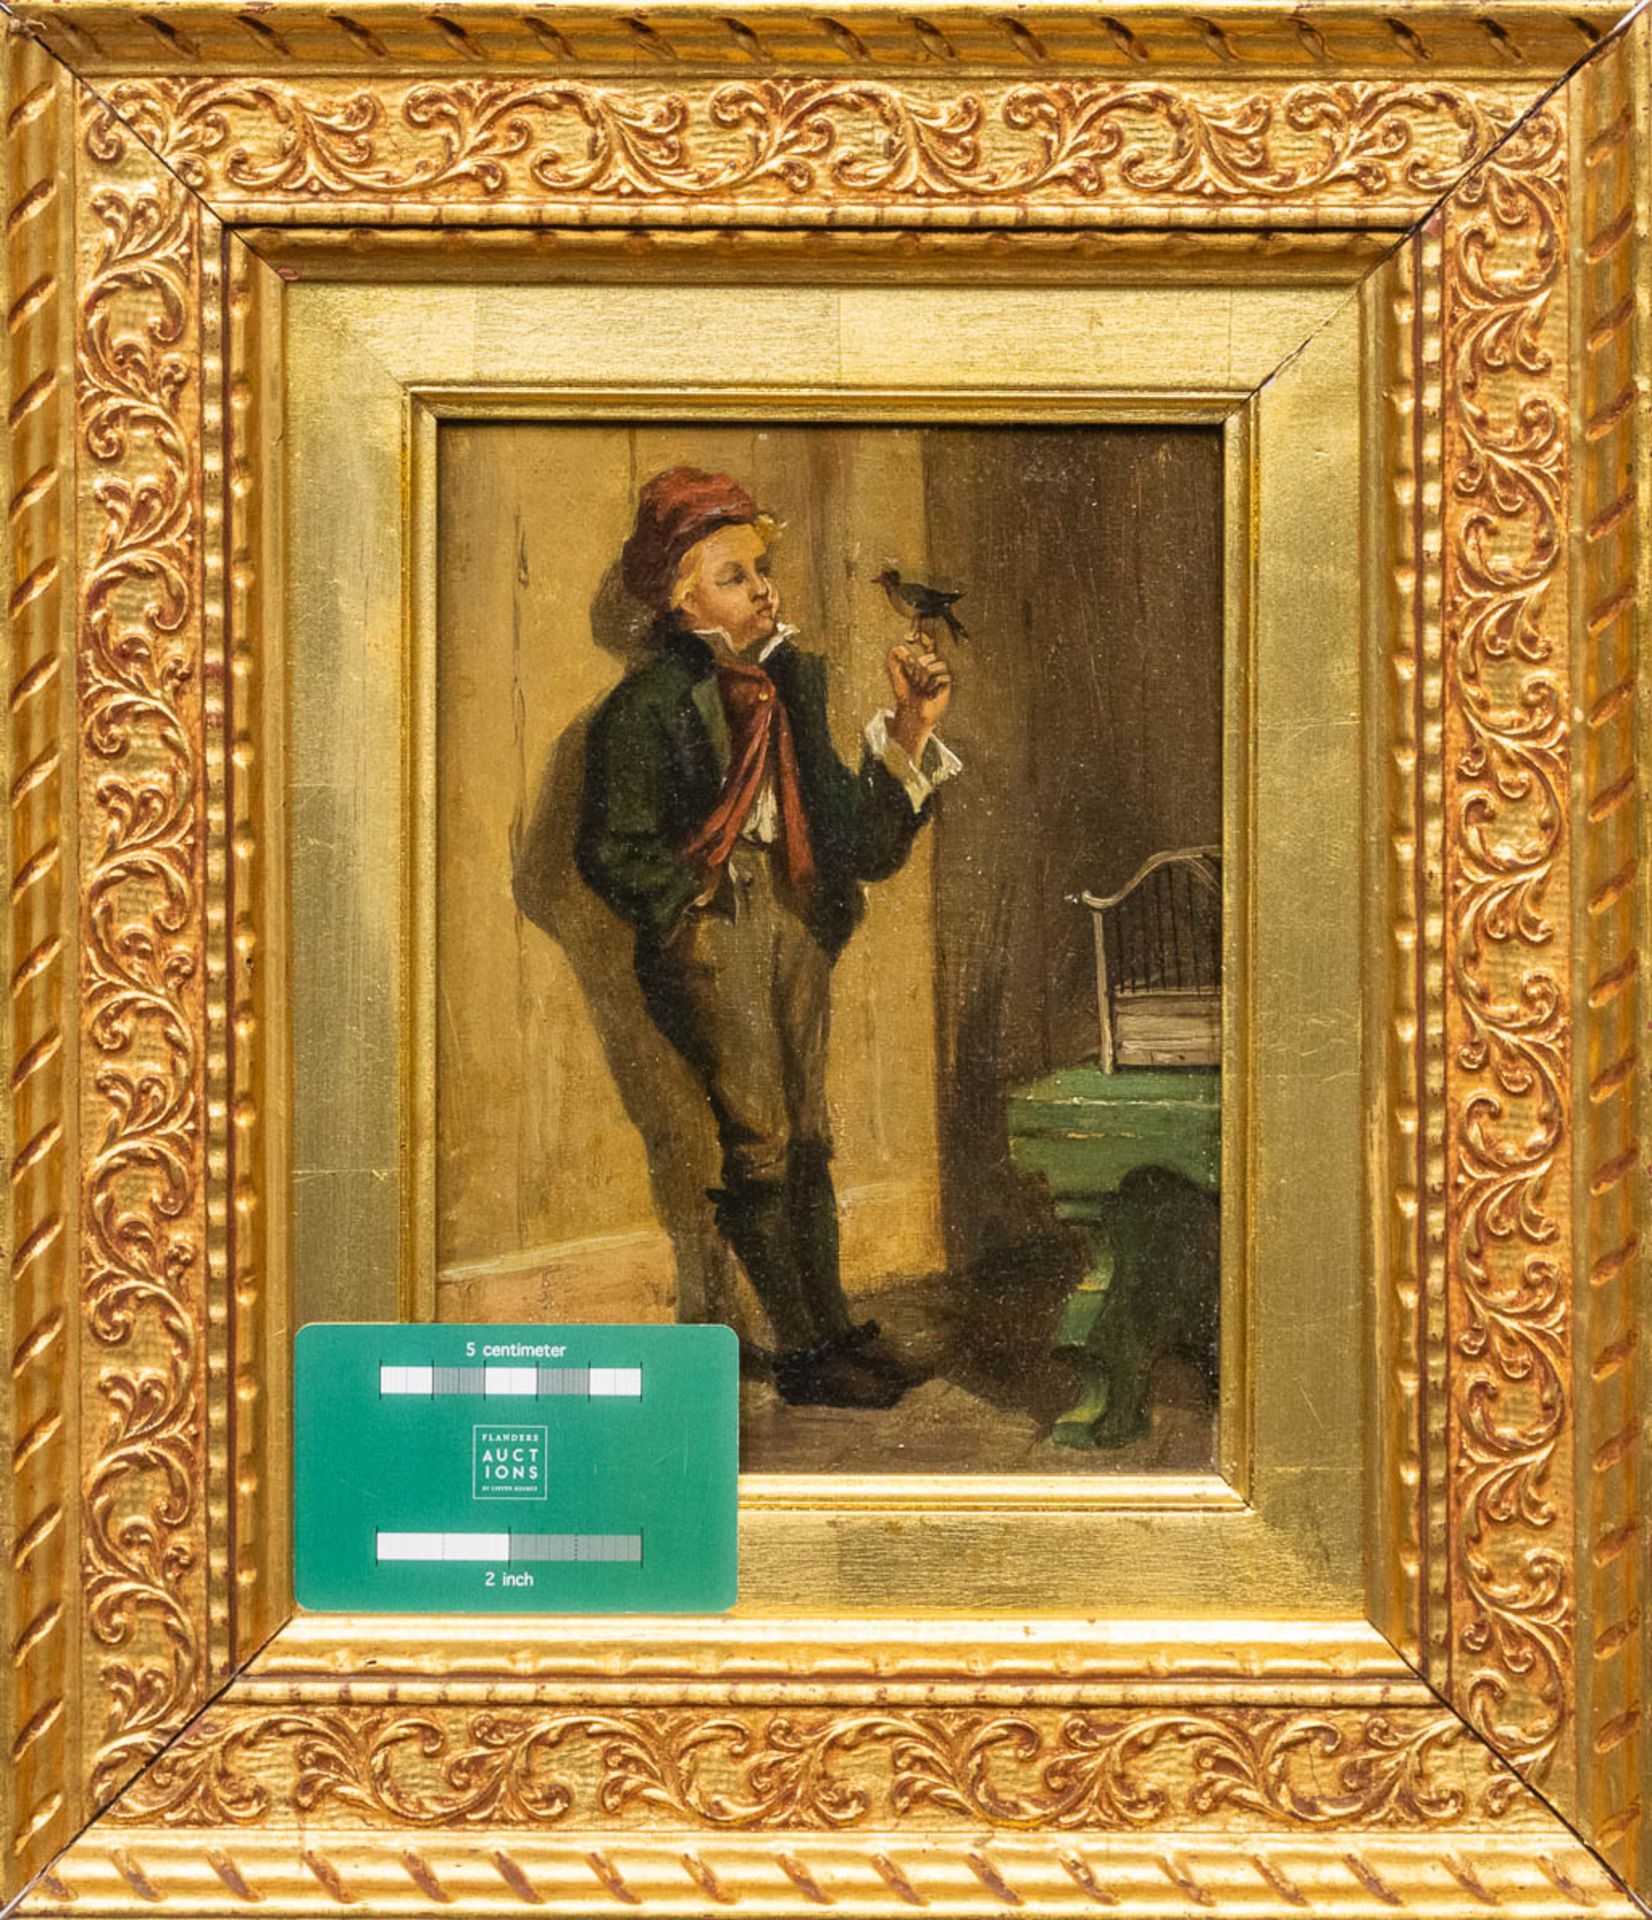 F. NOEL, elegant image of a boy with a bird, oil on panel. (16 x 21 cm) - Image 3 of 6